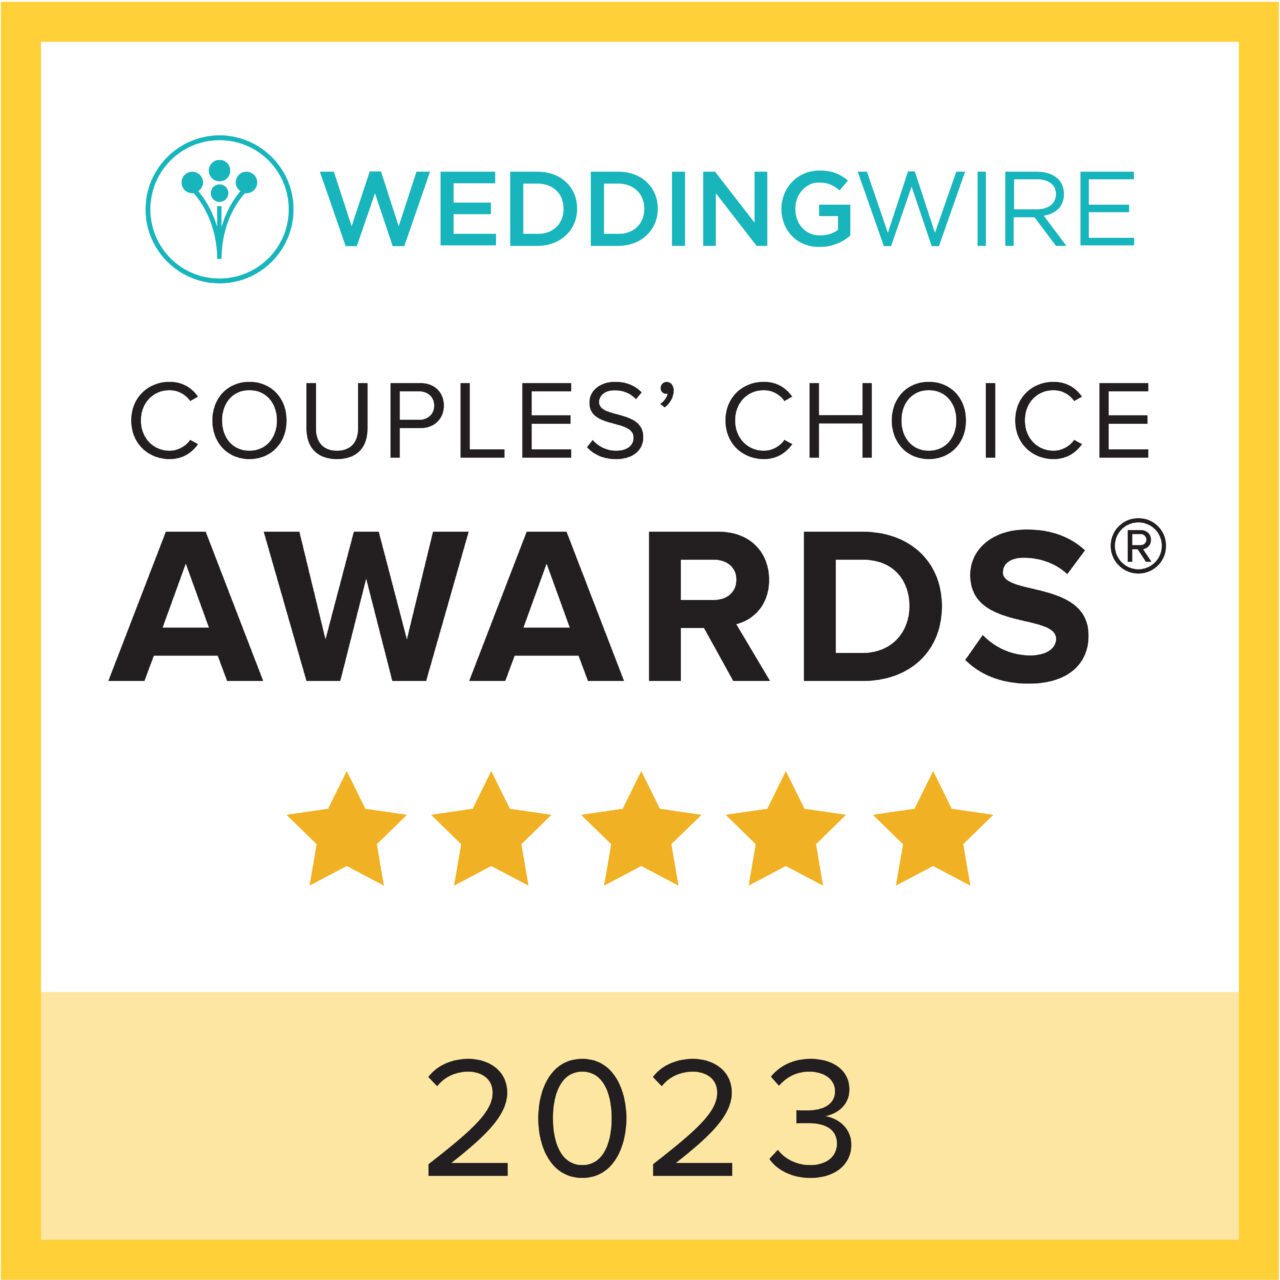 Complete Weddings + Events Baton Rouge Named Winner in 2023 WeddingWire Couples’ Choice Awards